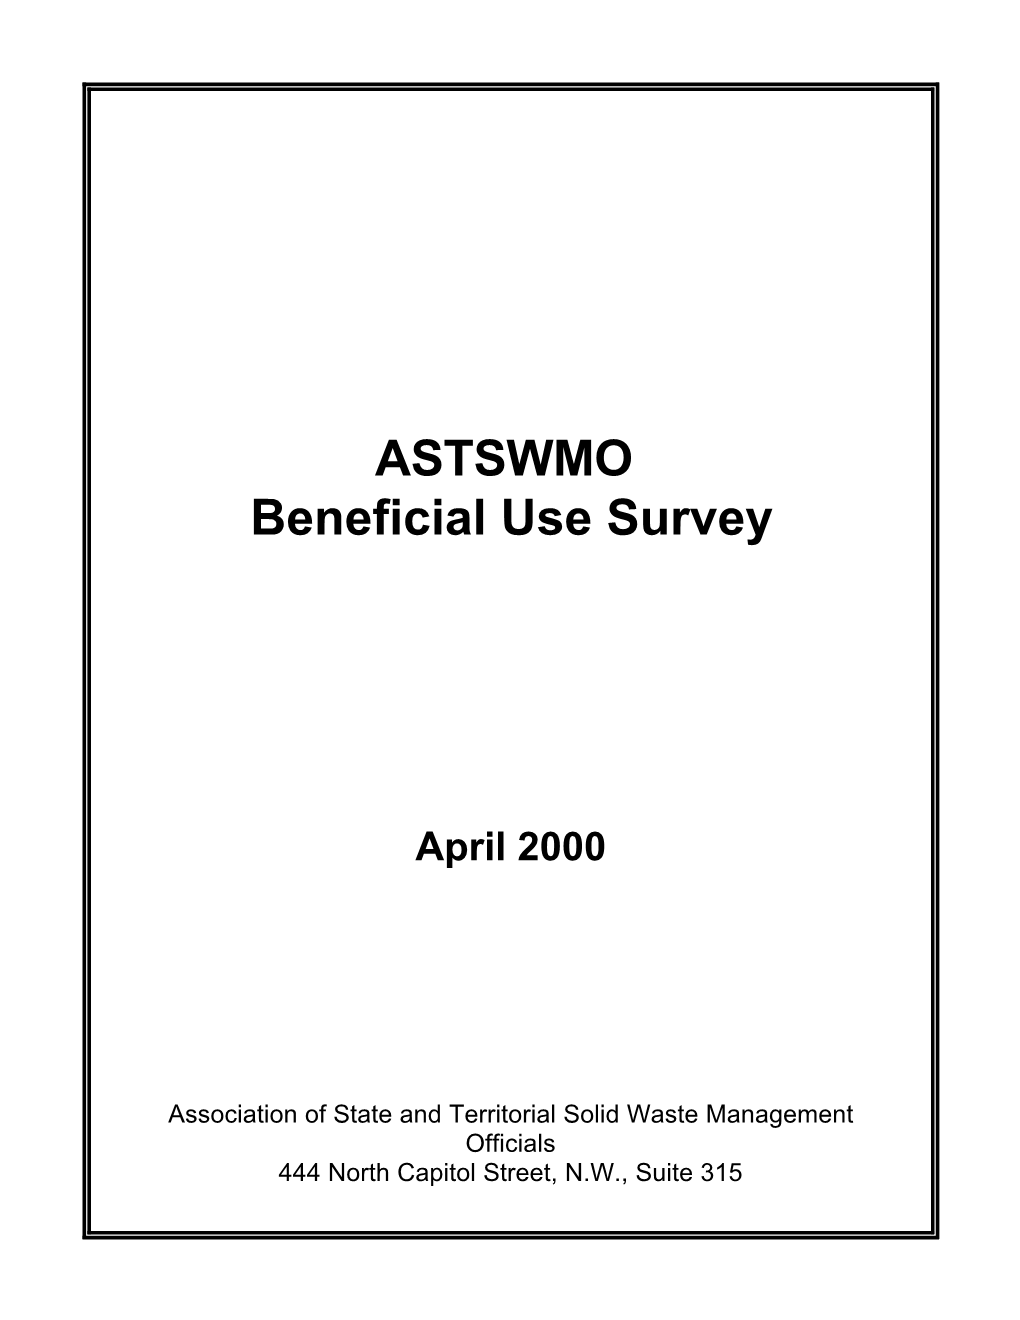 ASTSWMO Beneficial Use Survey 2000